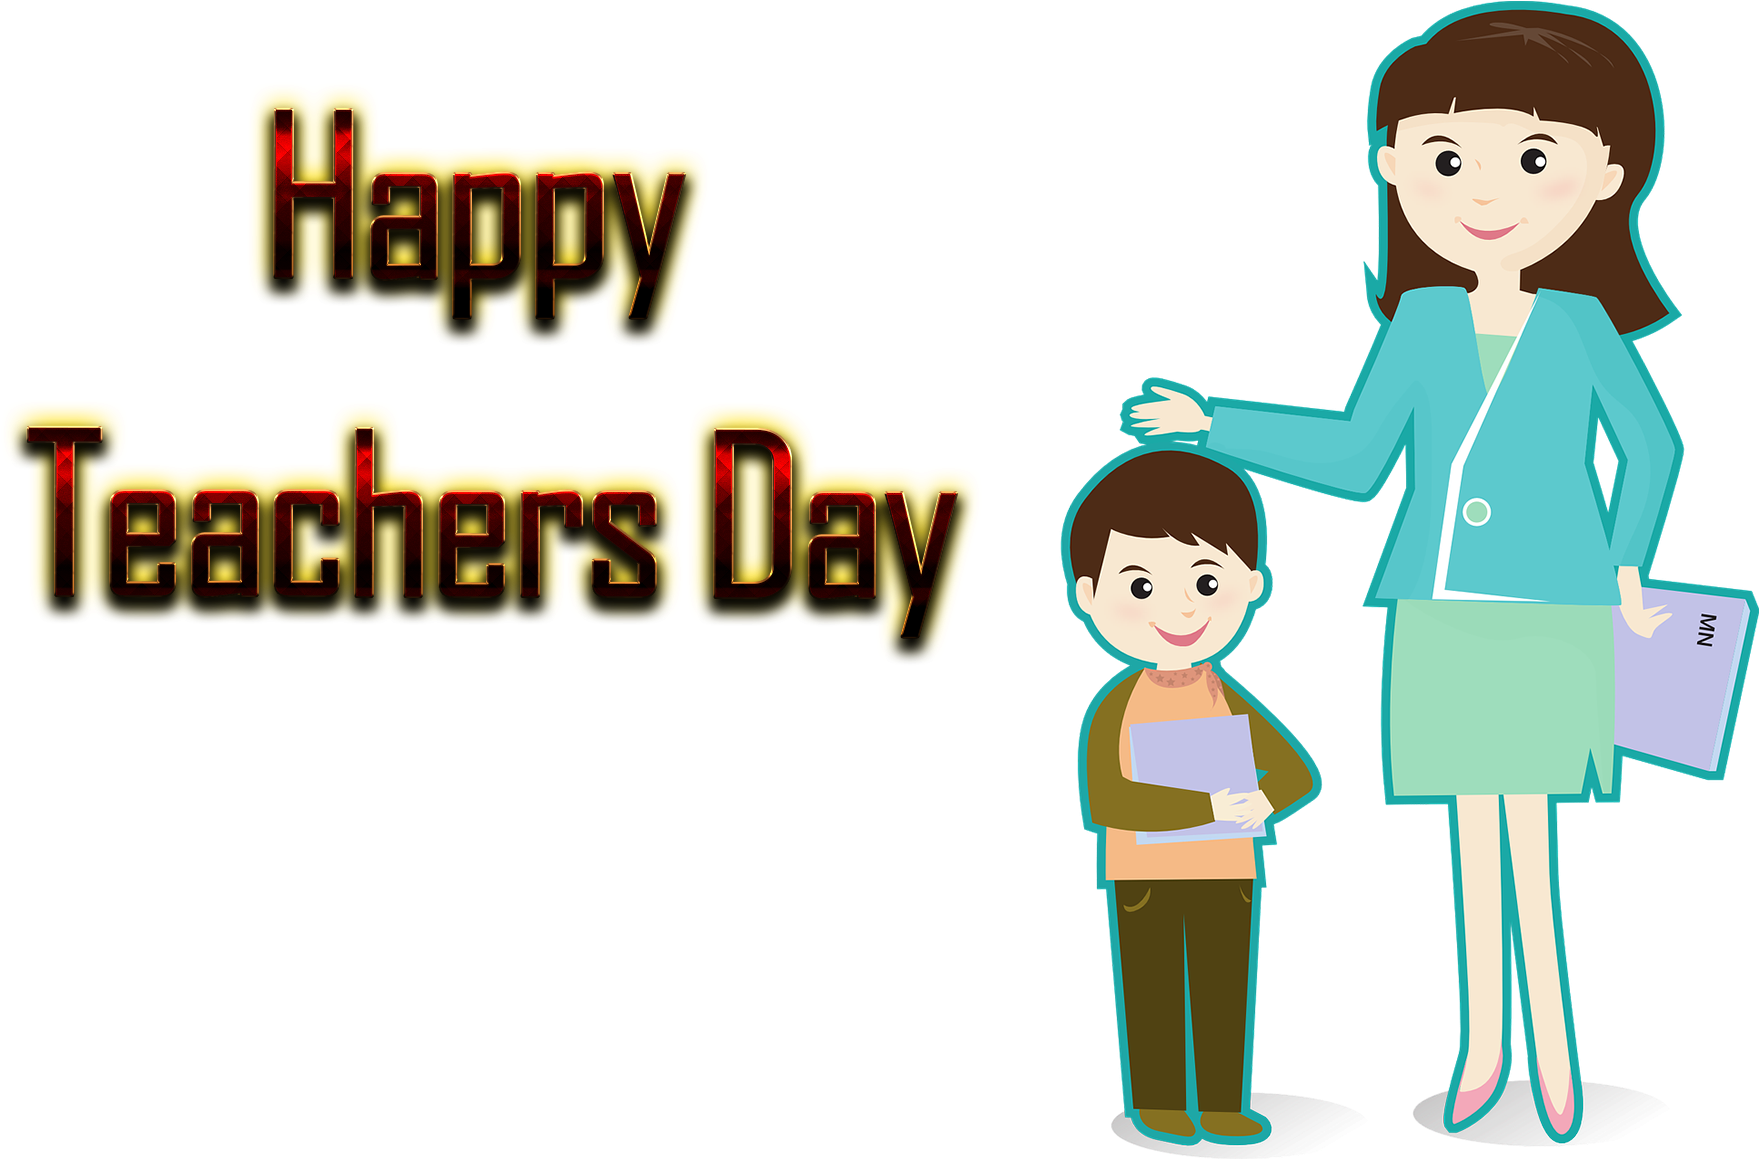 Teachers Day 2018 Images - 5 September 2018 Teacher Day (1920x1200), Png Download